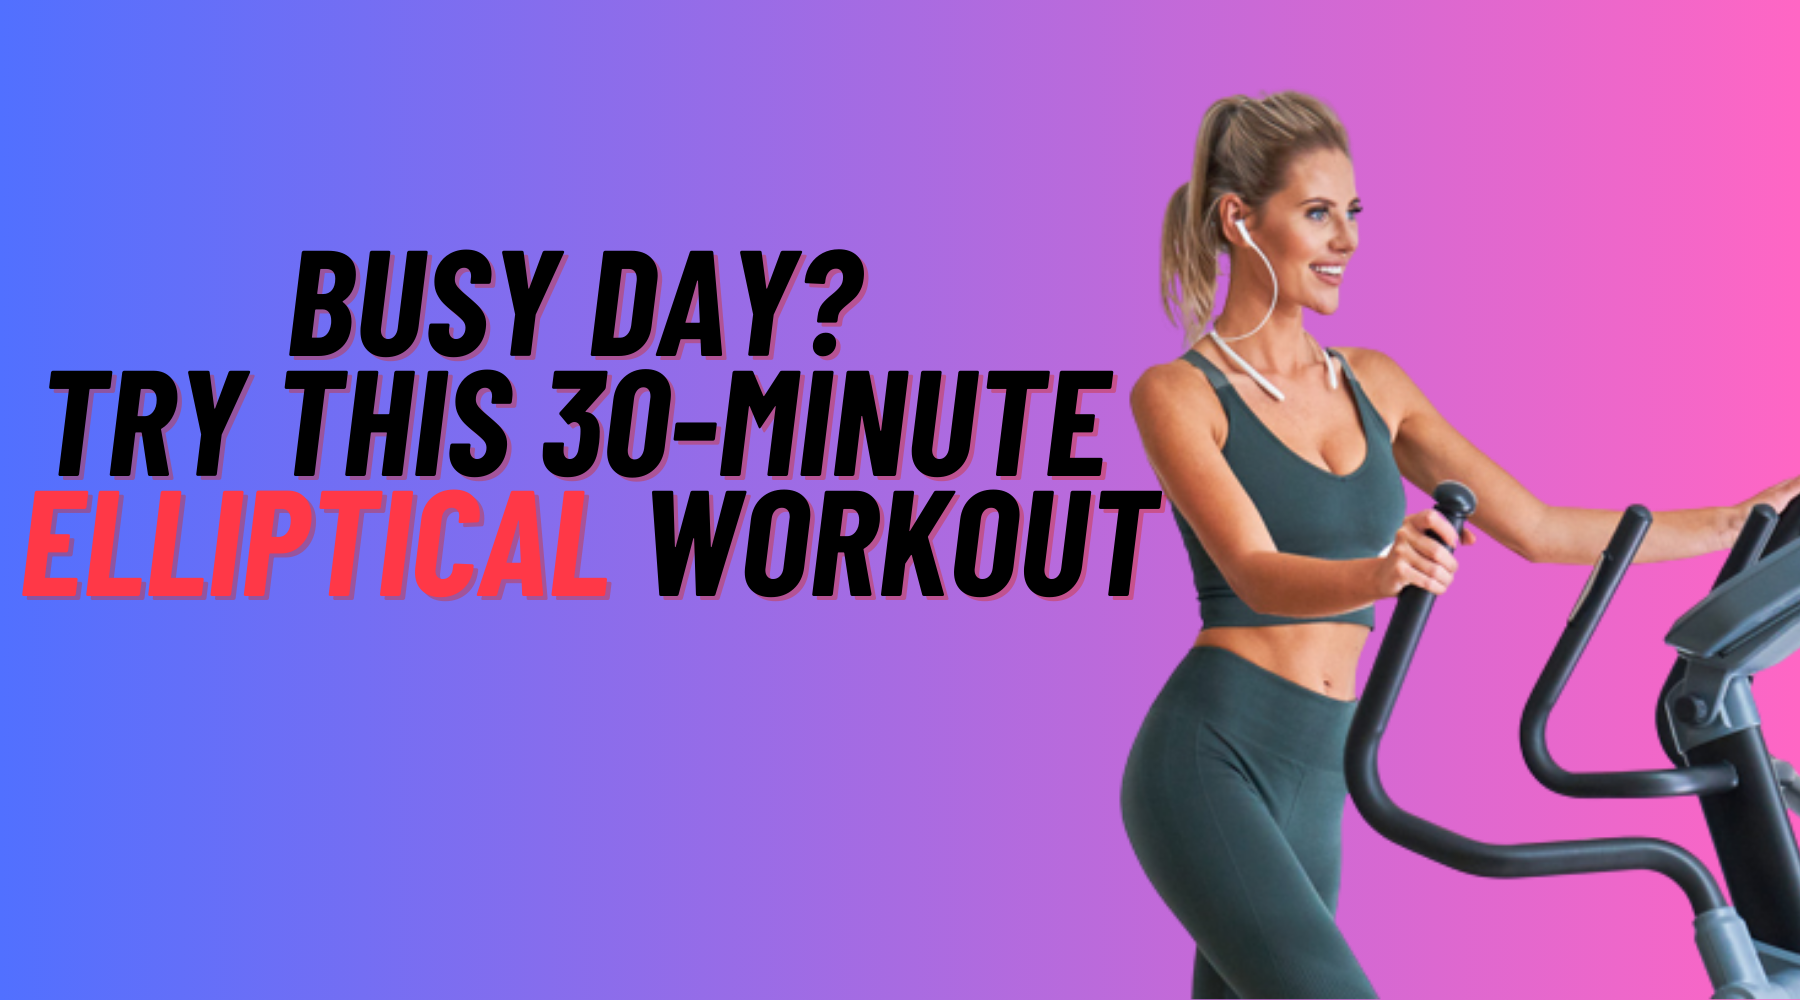 Busy Day? Try This 30-Minute Elliptical Workout